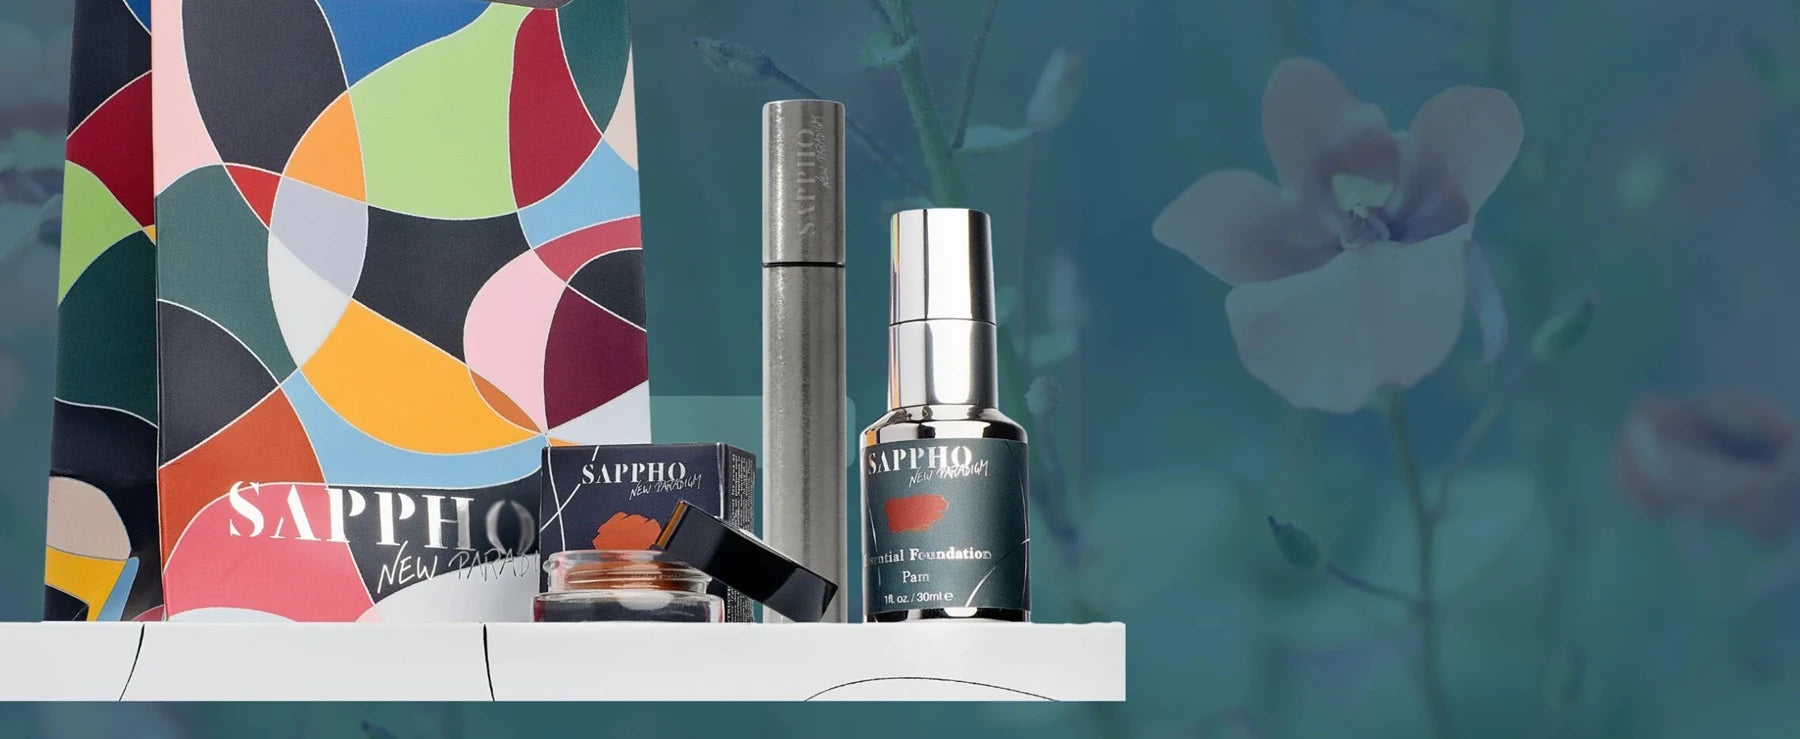 Sappho New Paradigm Makeup Cosmetics now available at One Fine Secret. Clean Beauty Australia